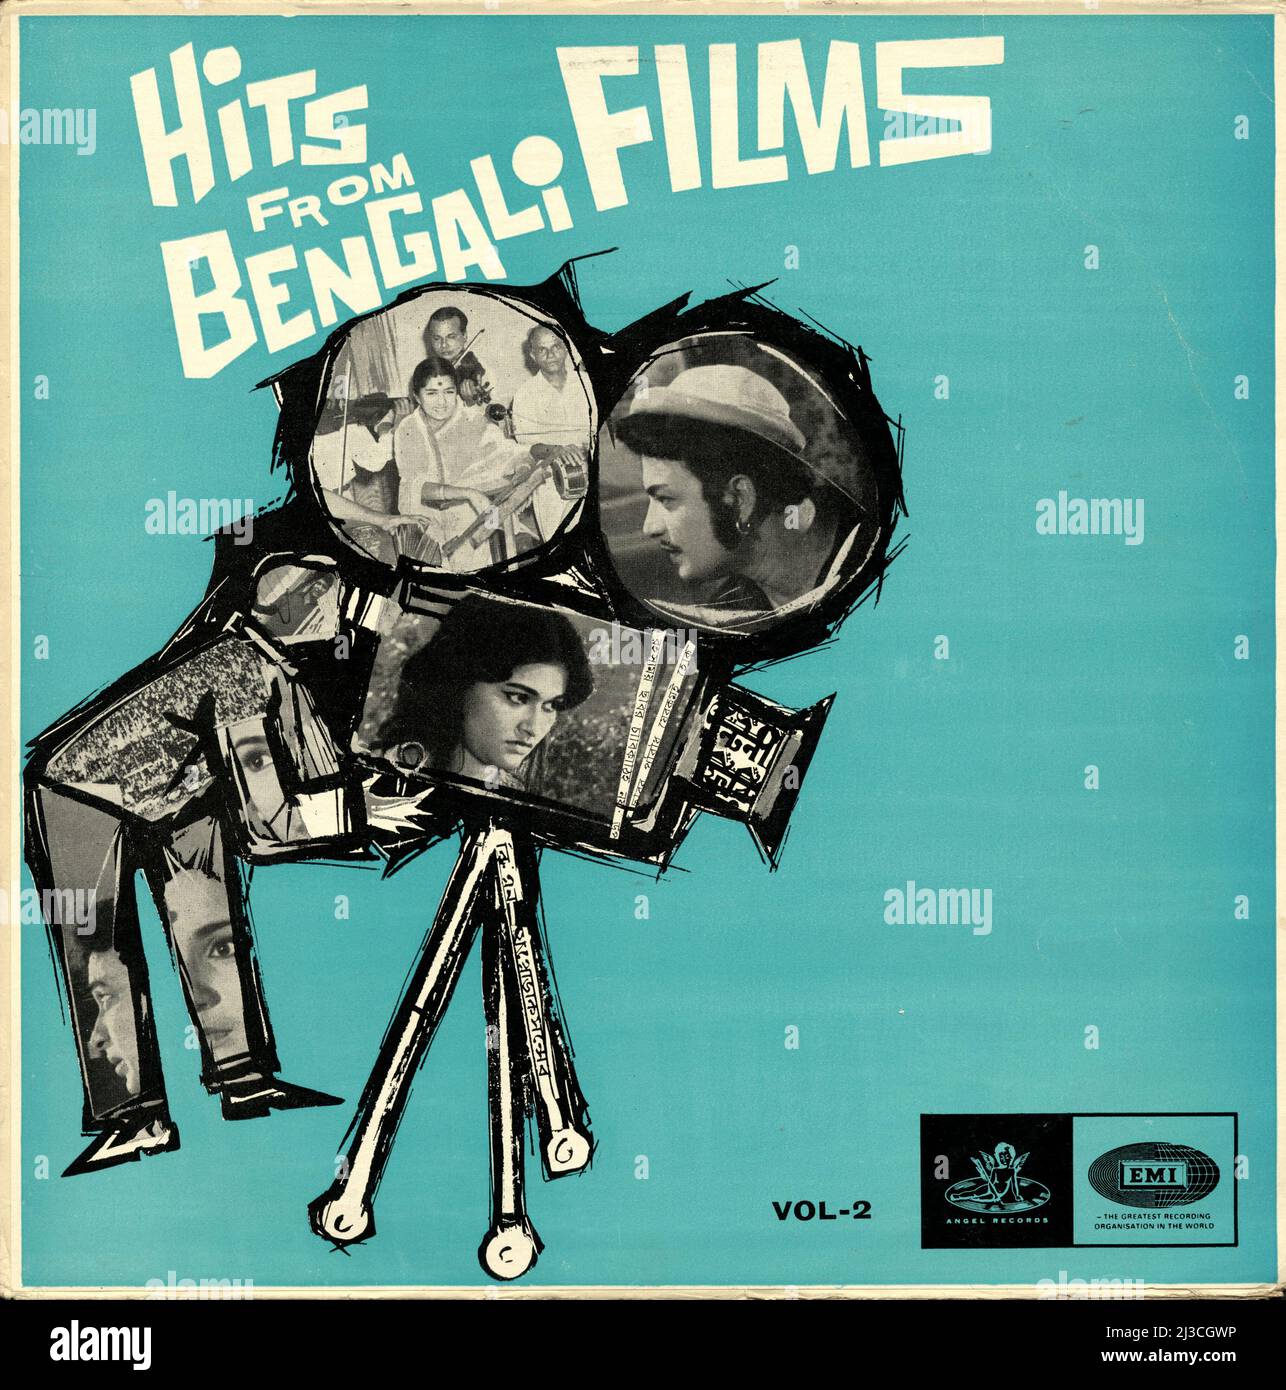 Hits From Bengali Films, volume two. EMI Angel Records, Indian pressed compilation vinyl album, 1960s. Stock Photo